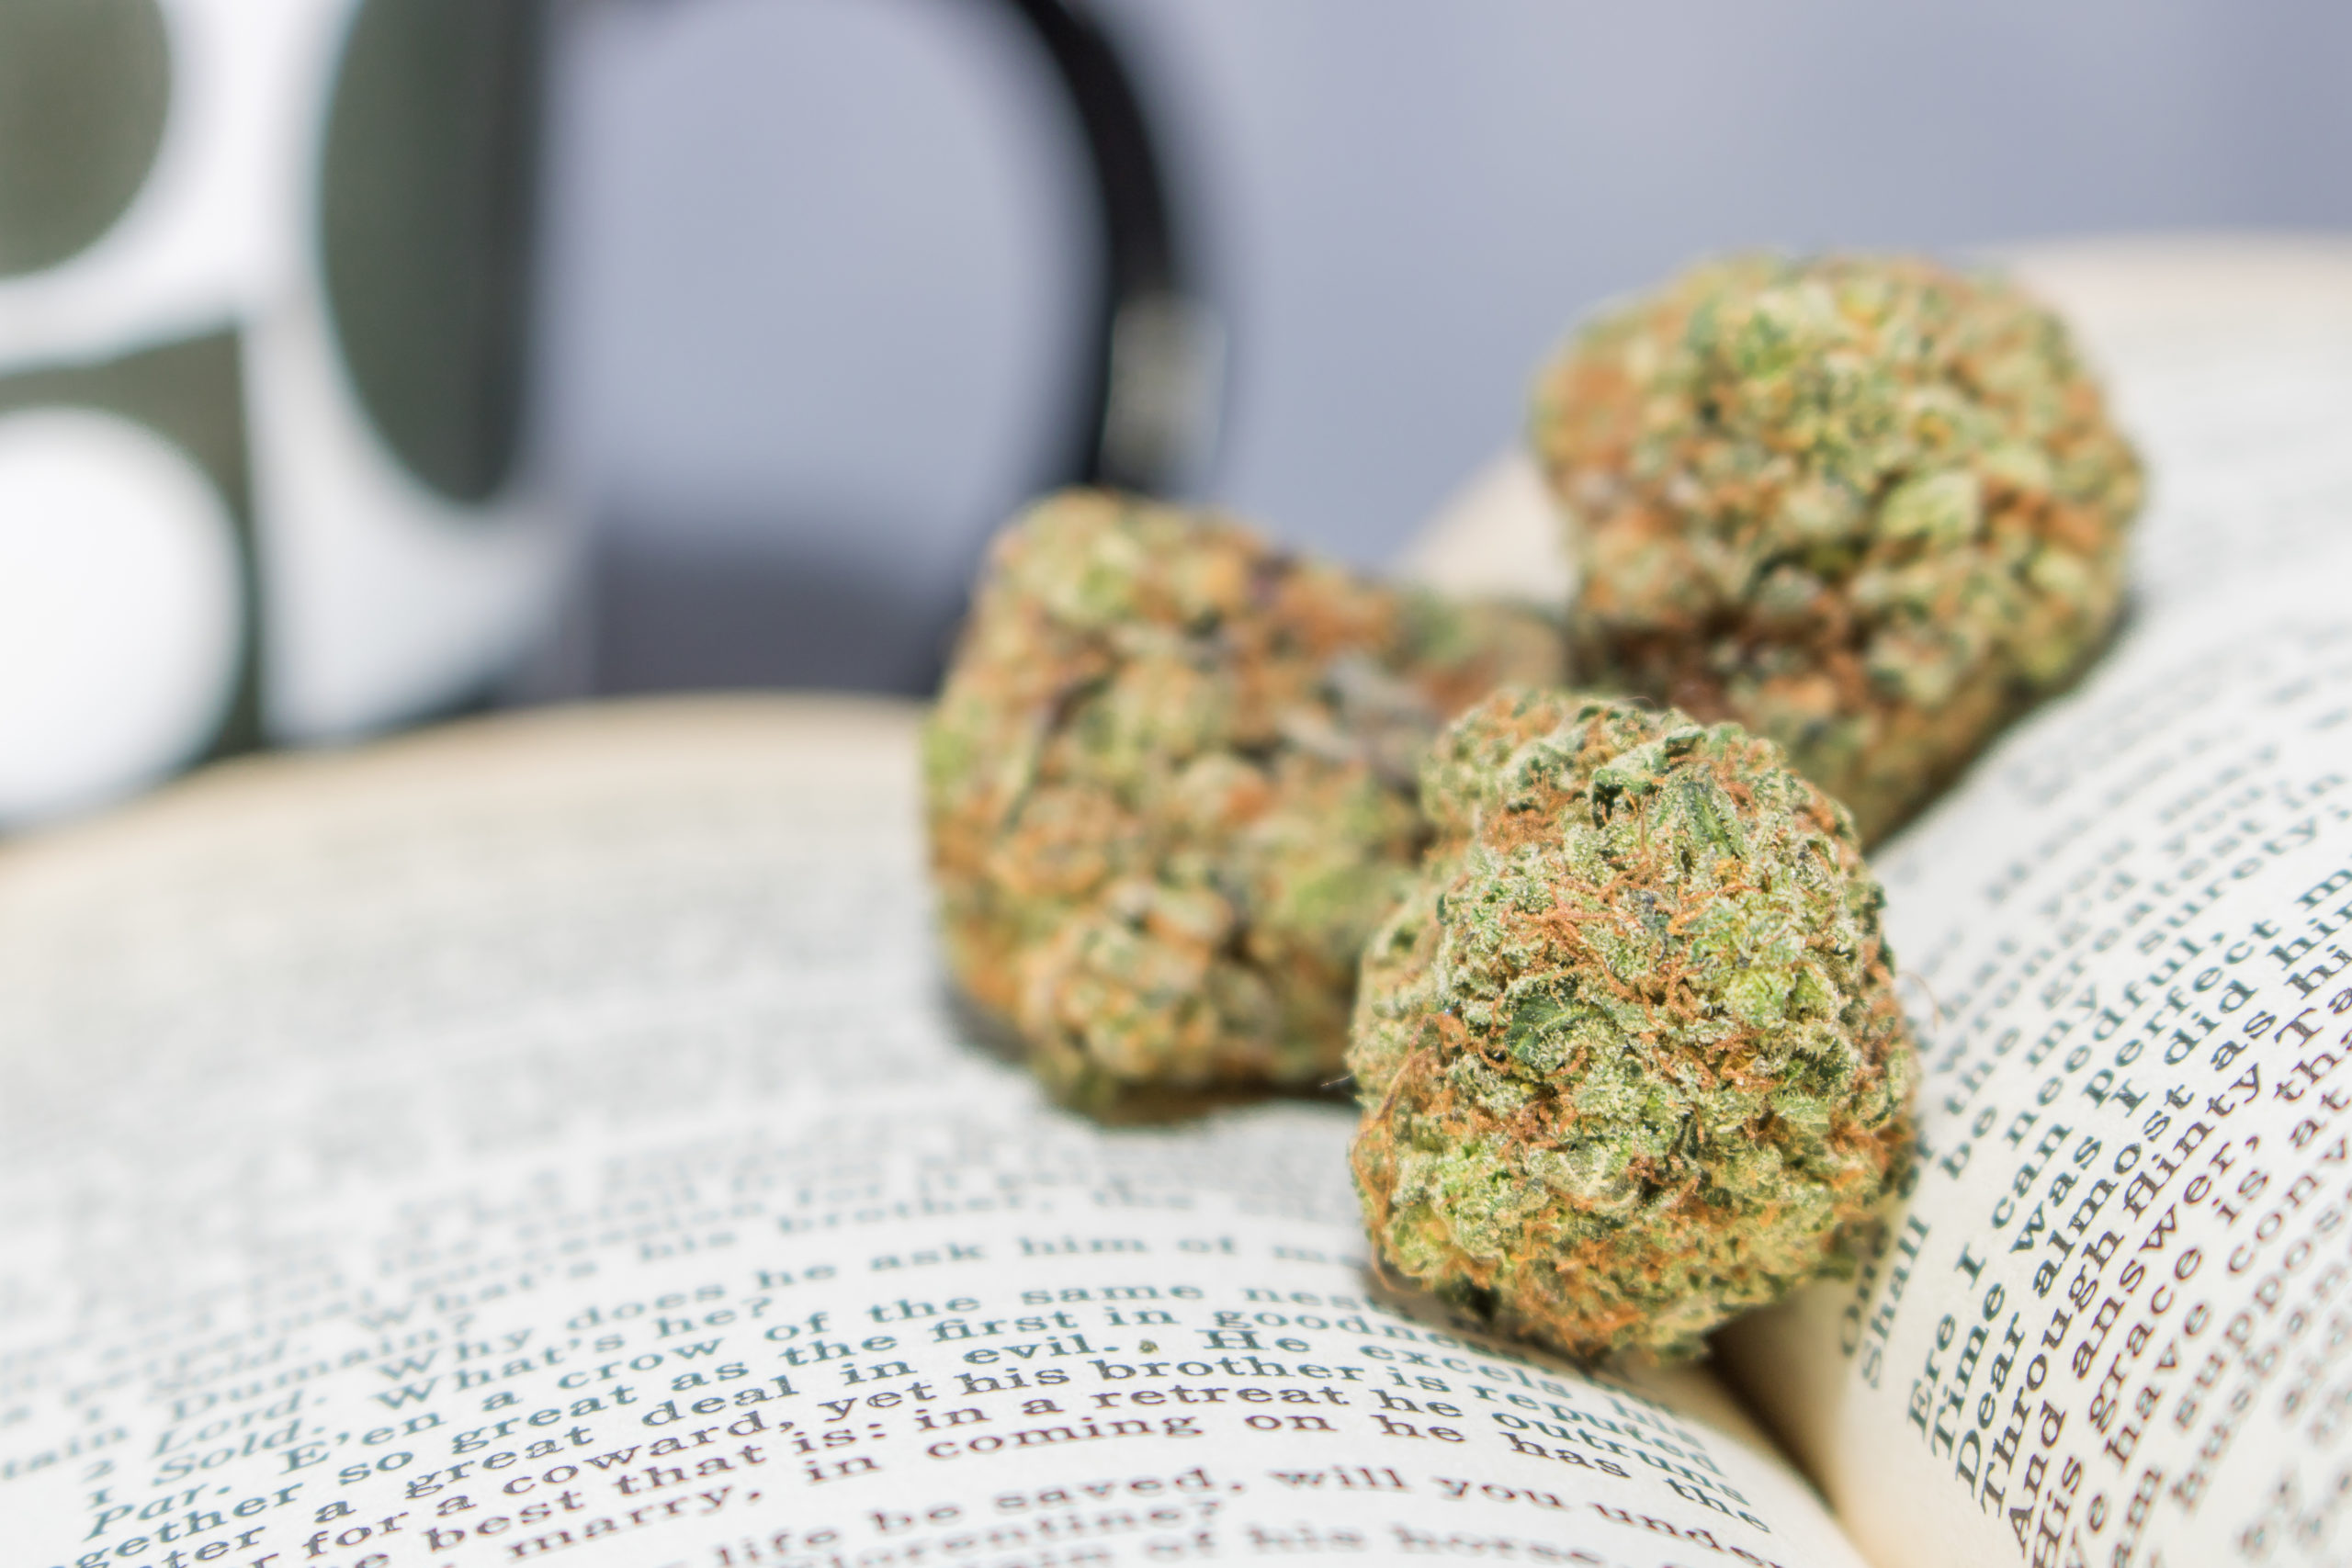 You are currently viewing The Best Weed Reads to Build Your Cannabis Library.